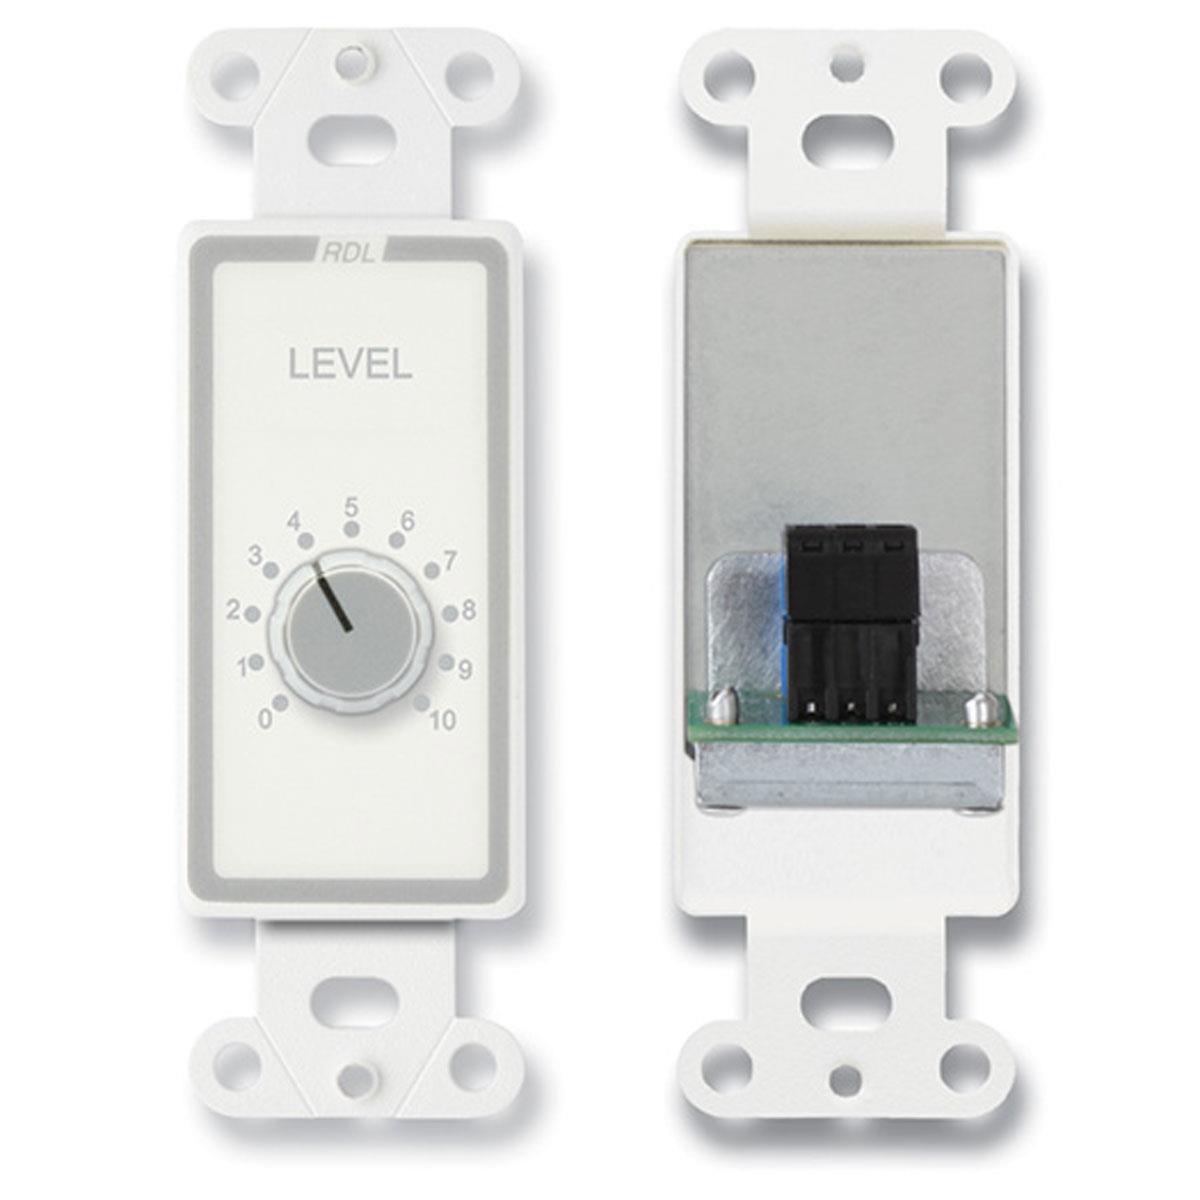 Image of RDL D-RLC10K Rotary Remote Level Control